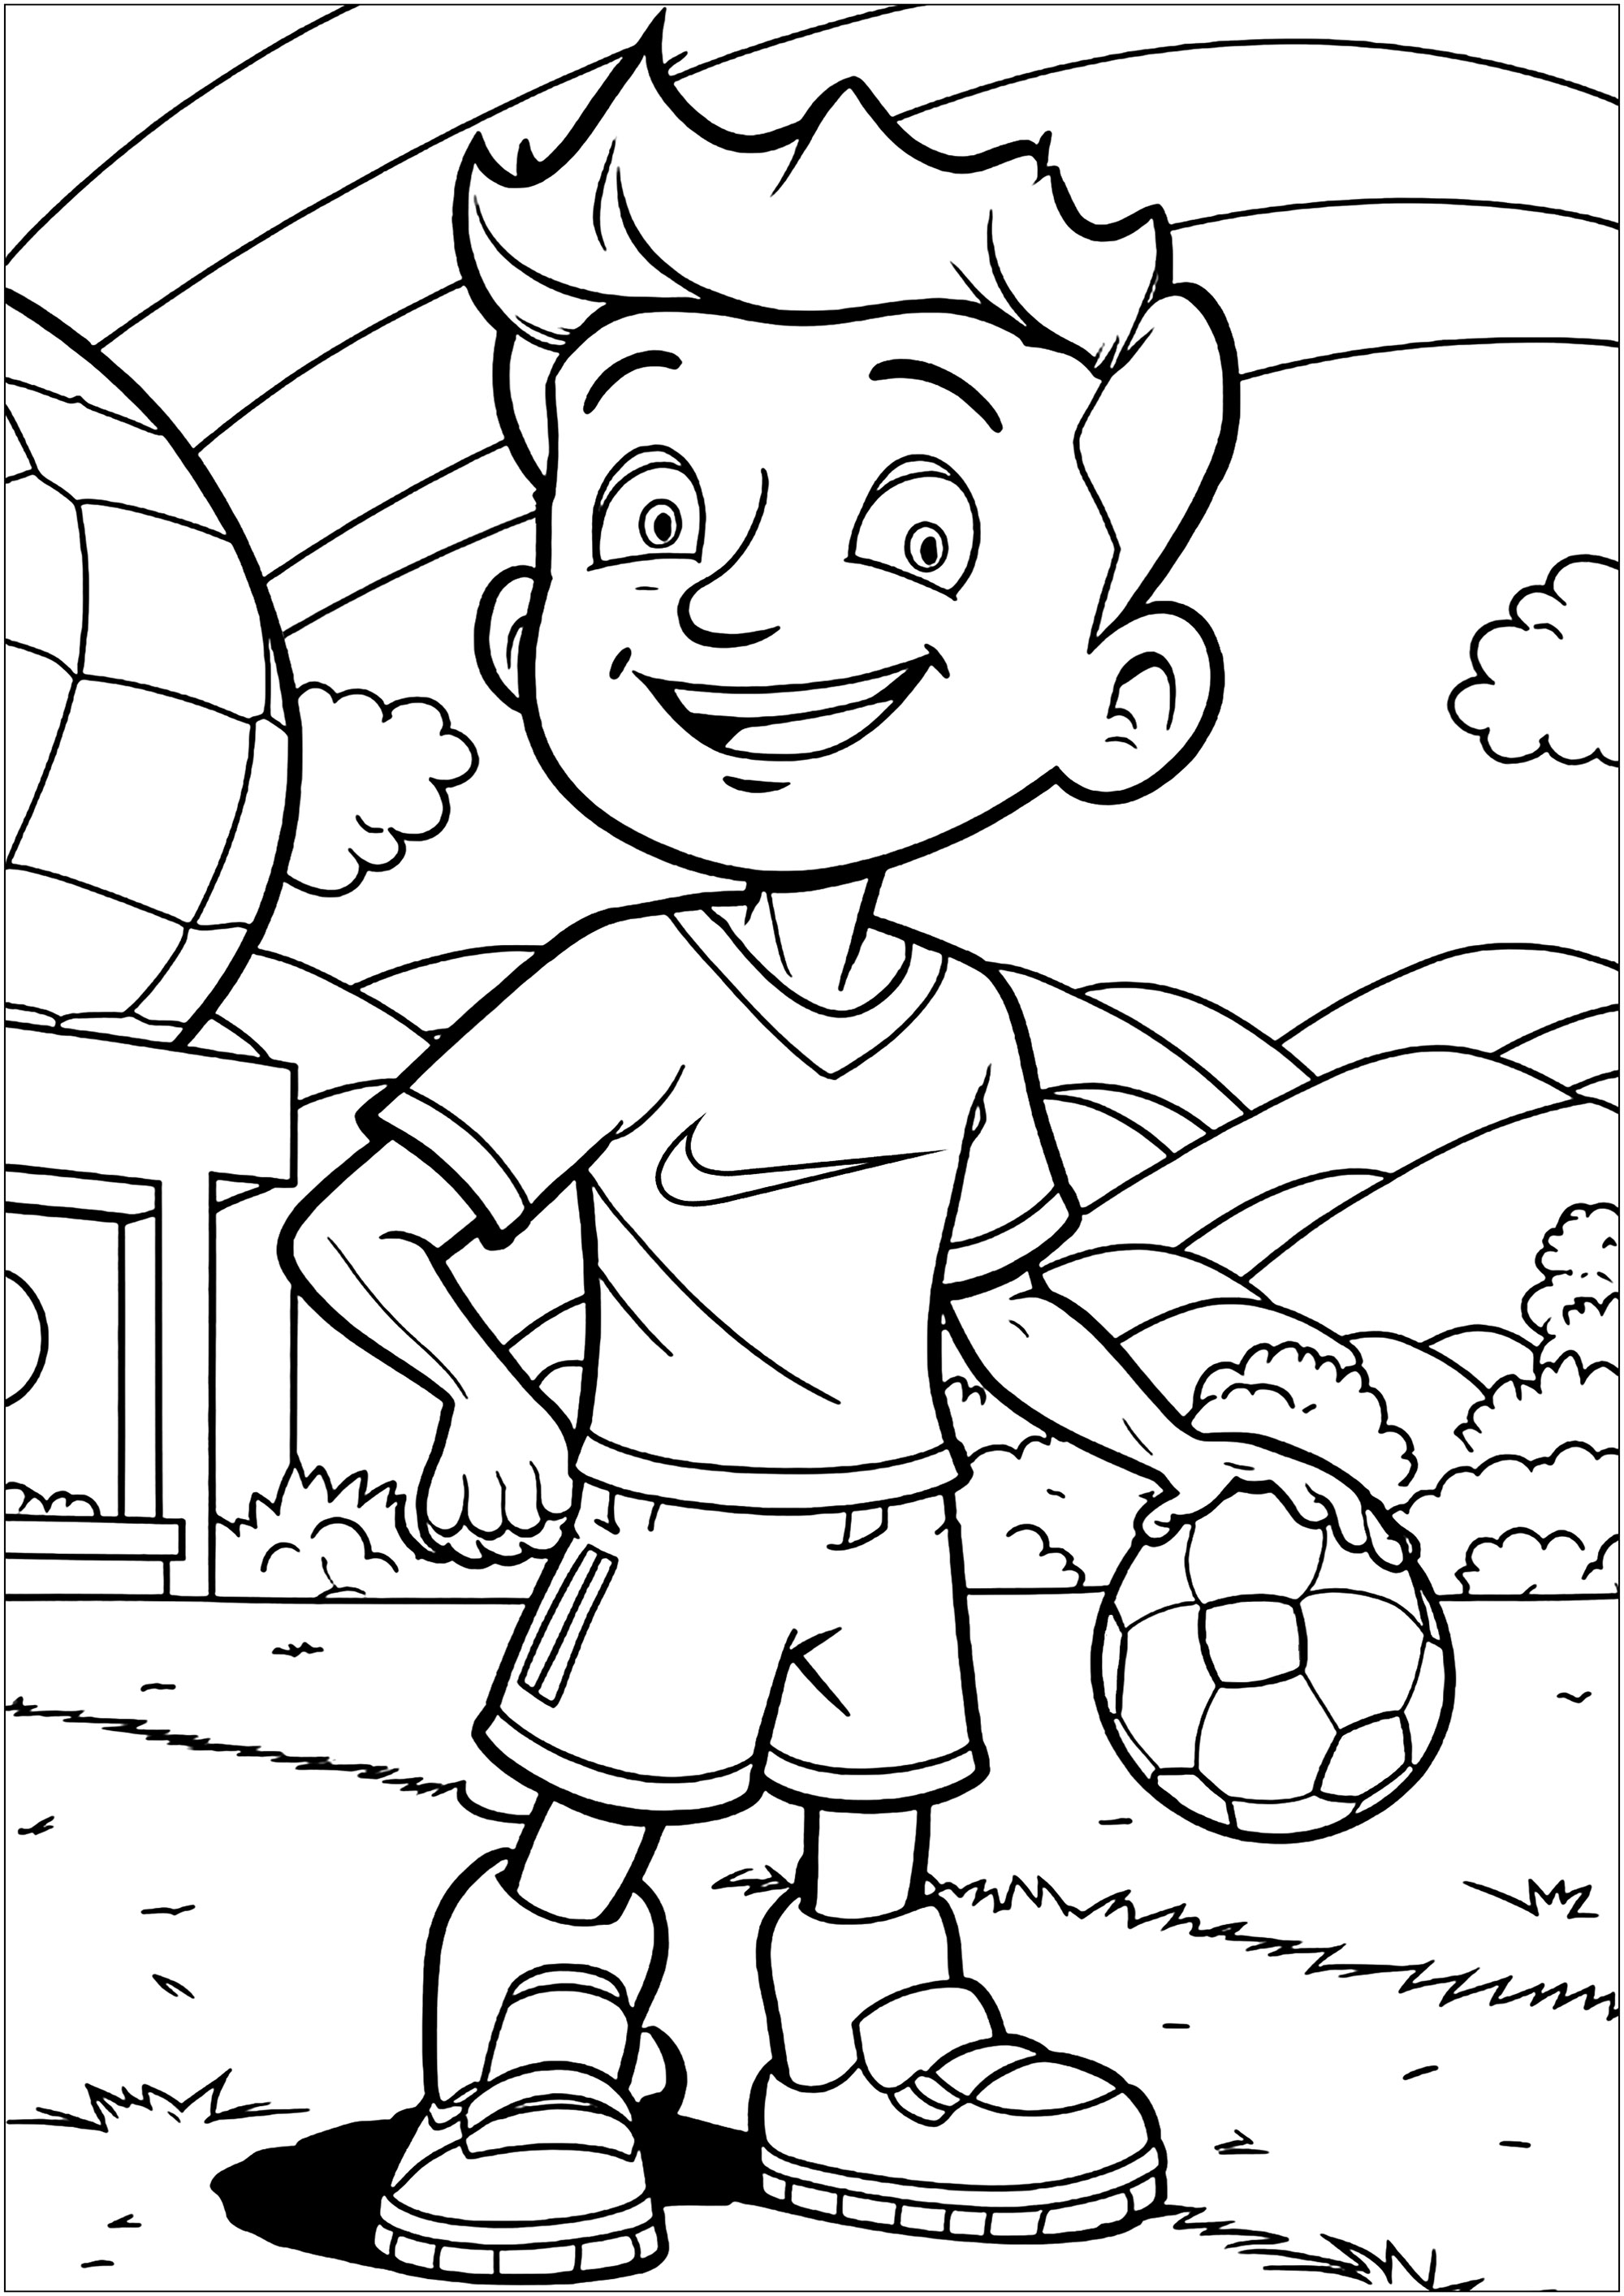 Soccer Kids Coloring Pages